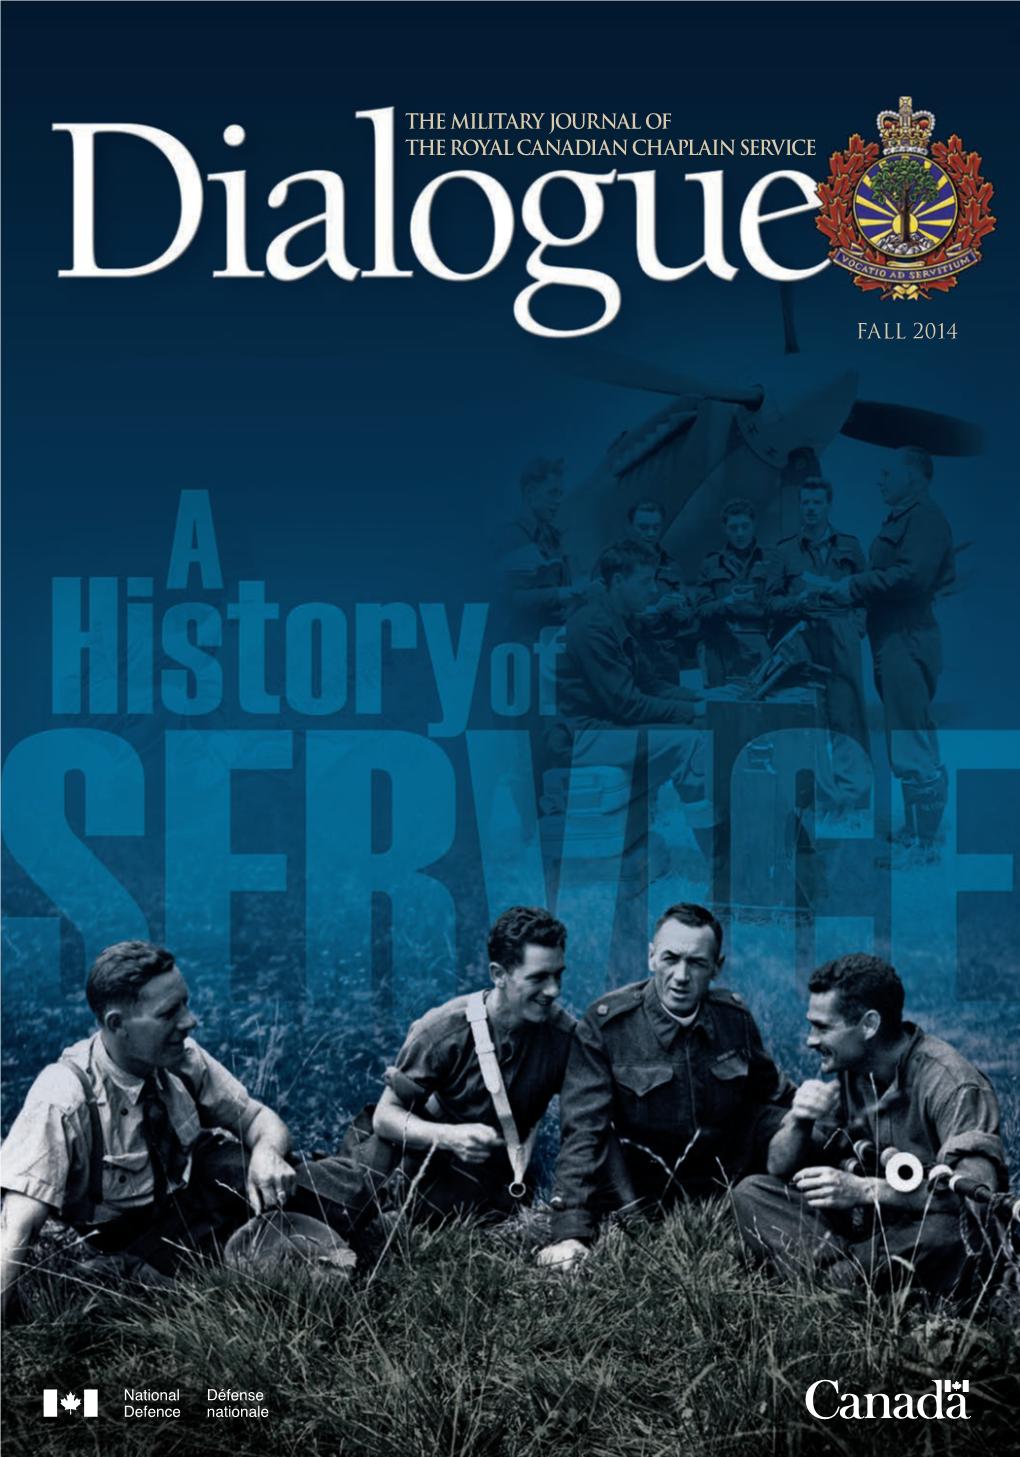 The Military Journal of the Royal Canadian Chaplain Service